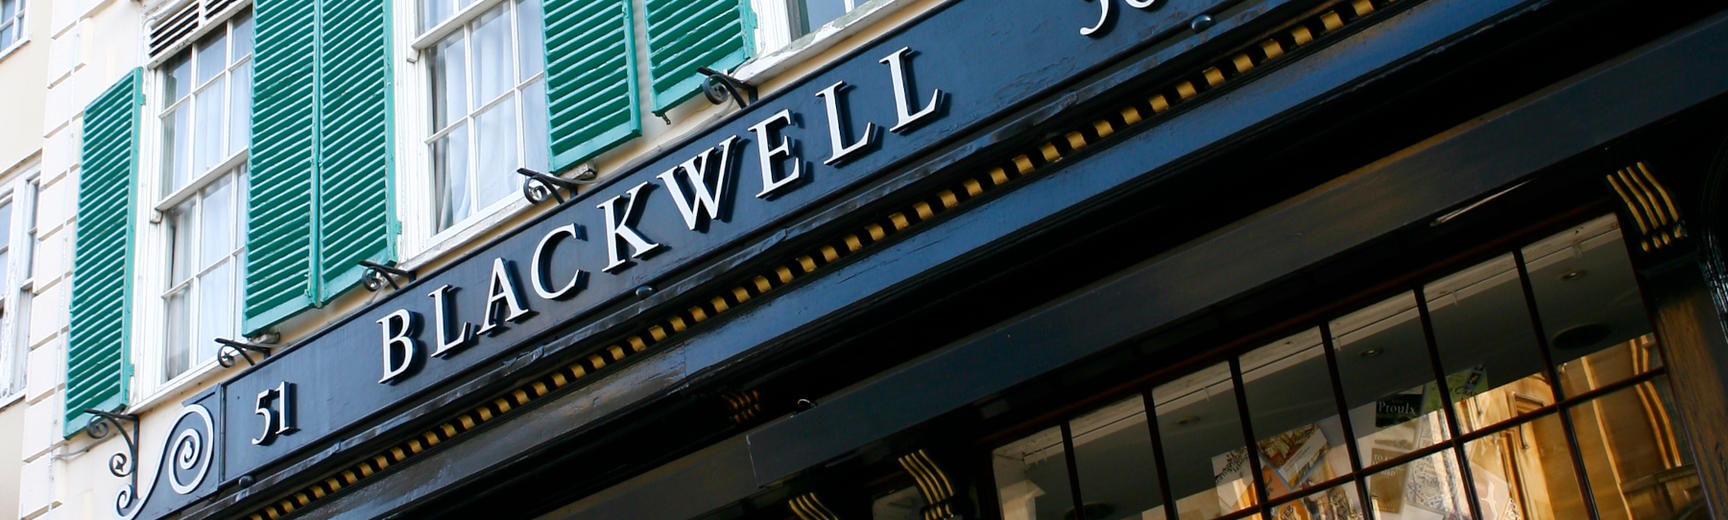 Blackwell's shop front at 50 Broad Street Oxford